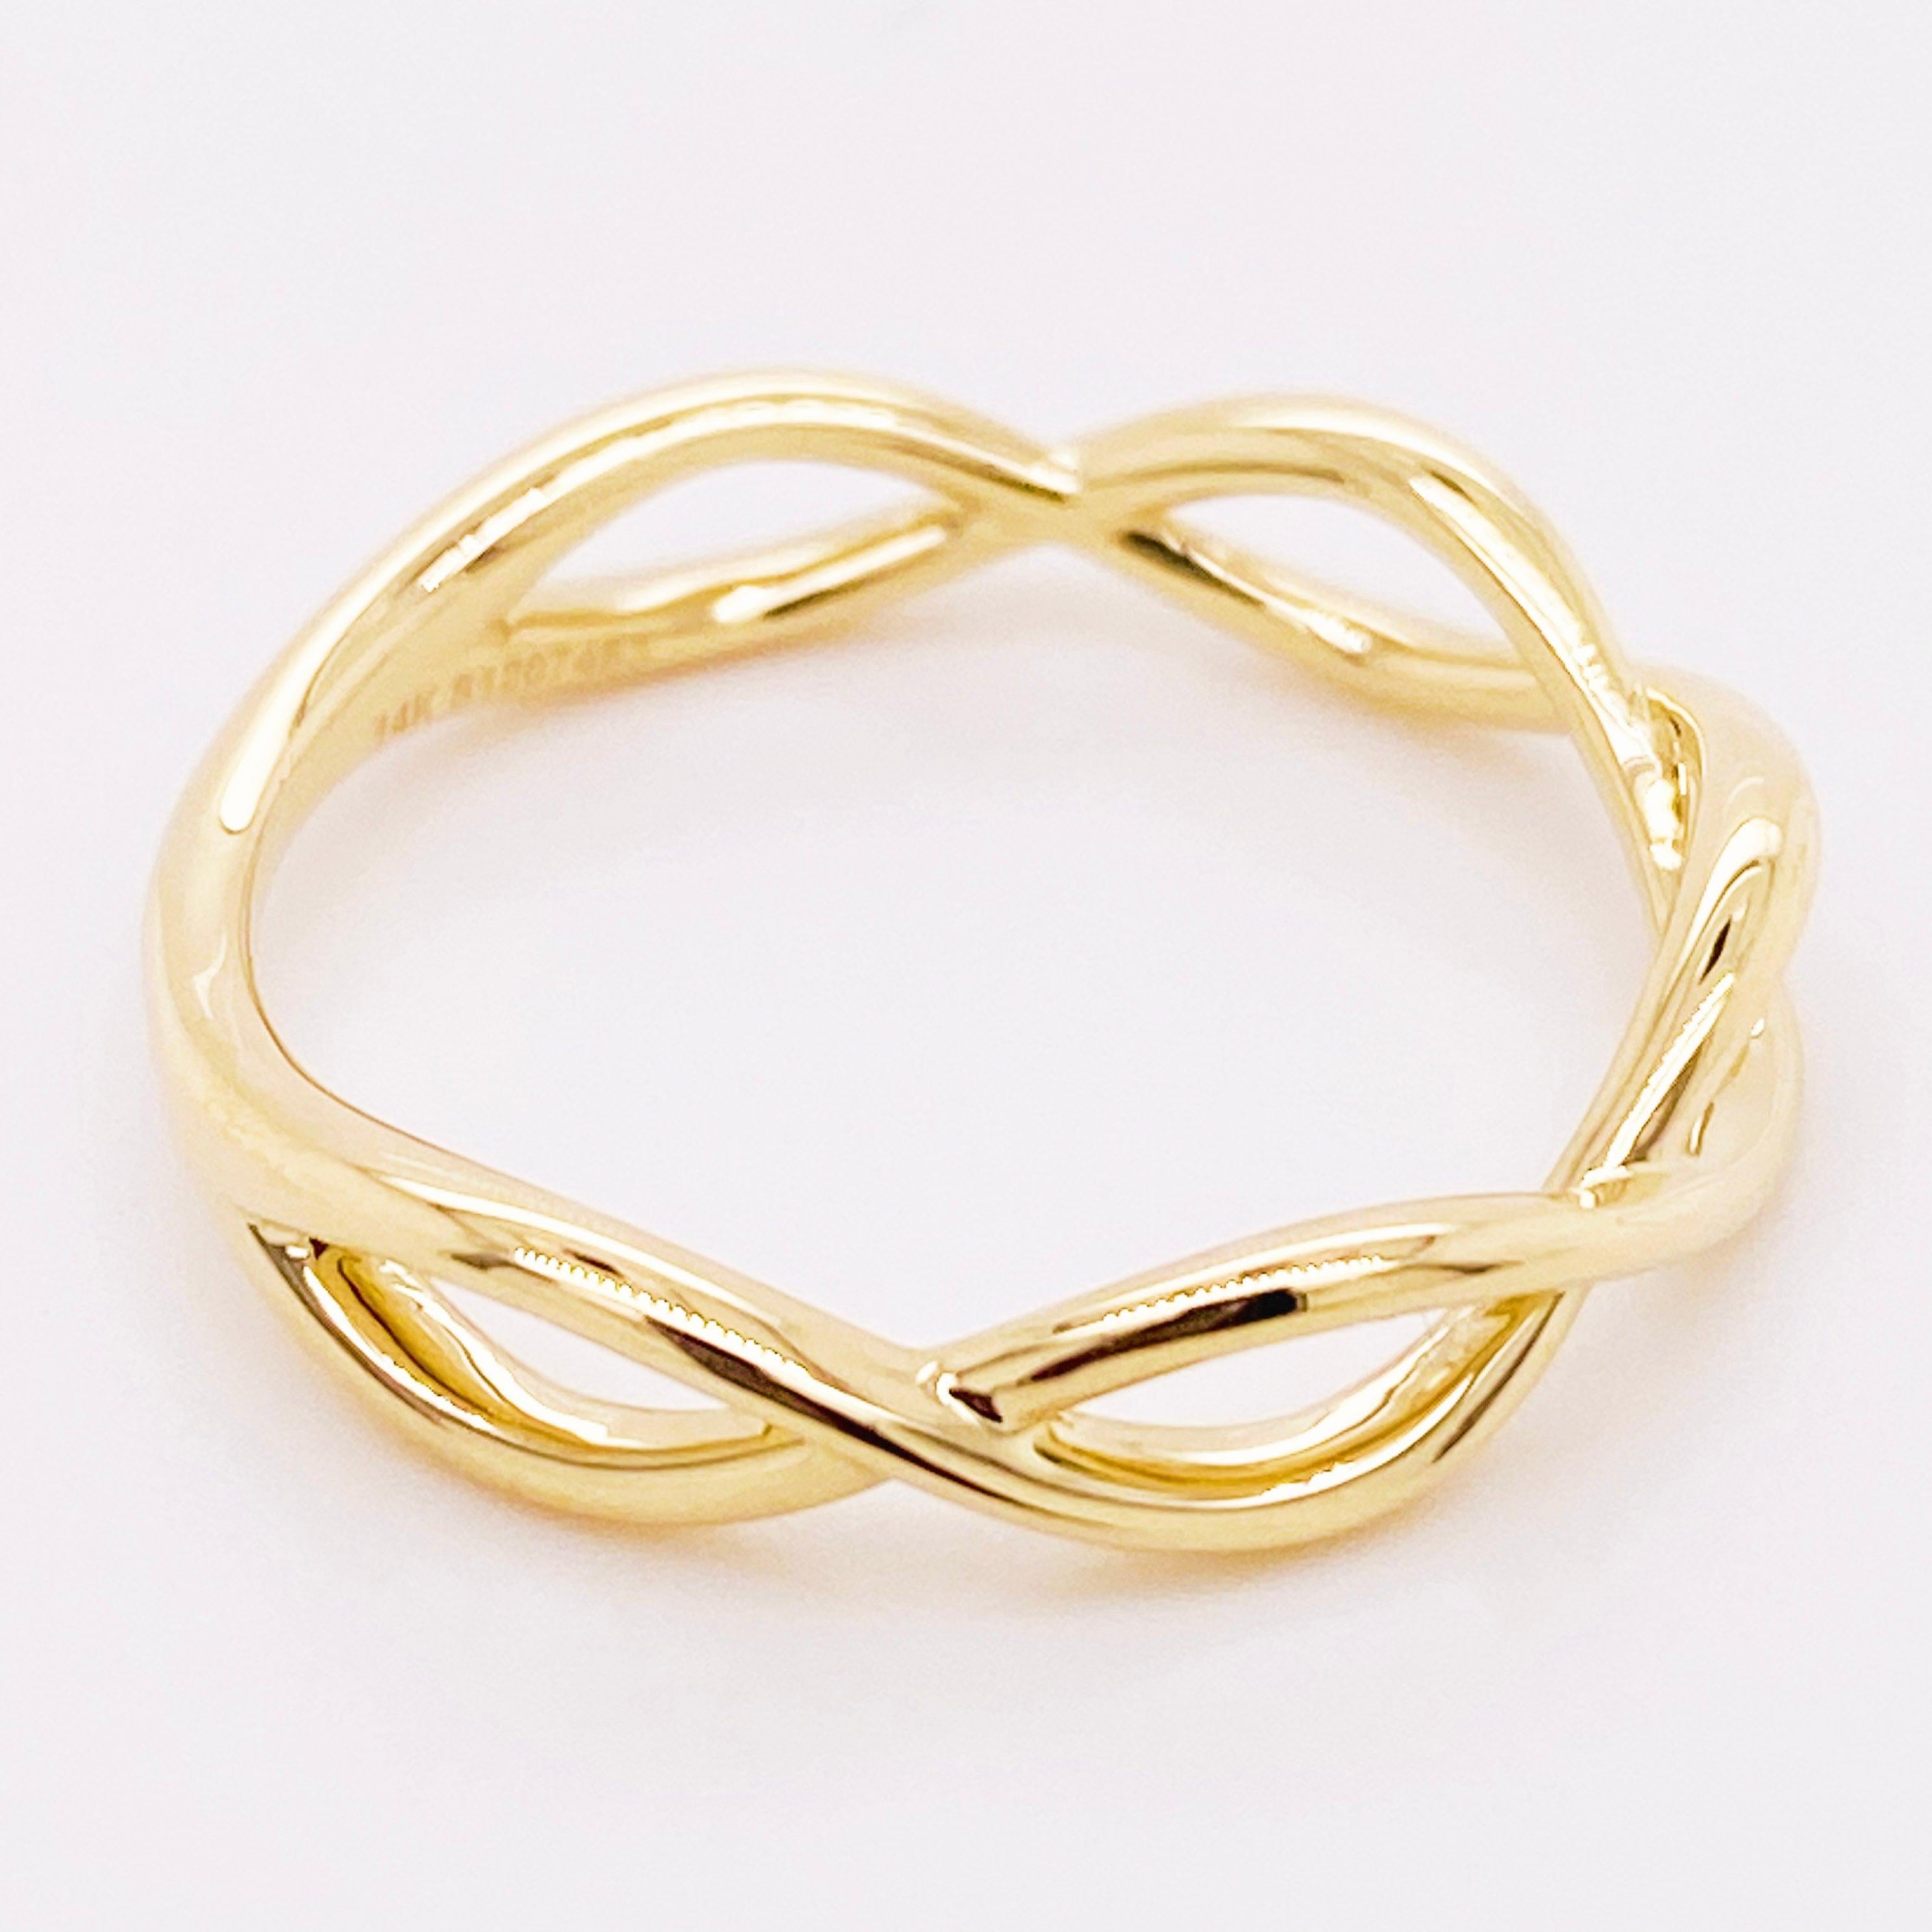 Gold Twisted Ring, 14 Karat Yellow Gold Twisted Stackable Band, LR51926Y4JJJ 4